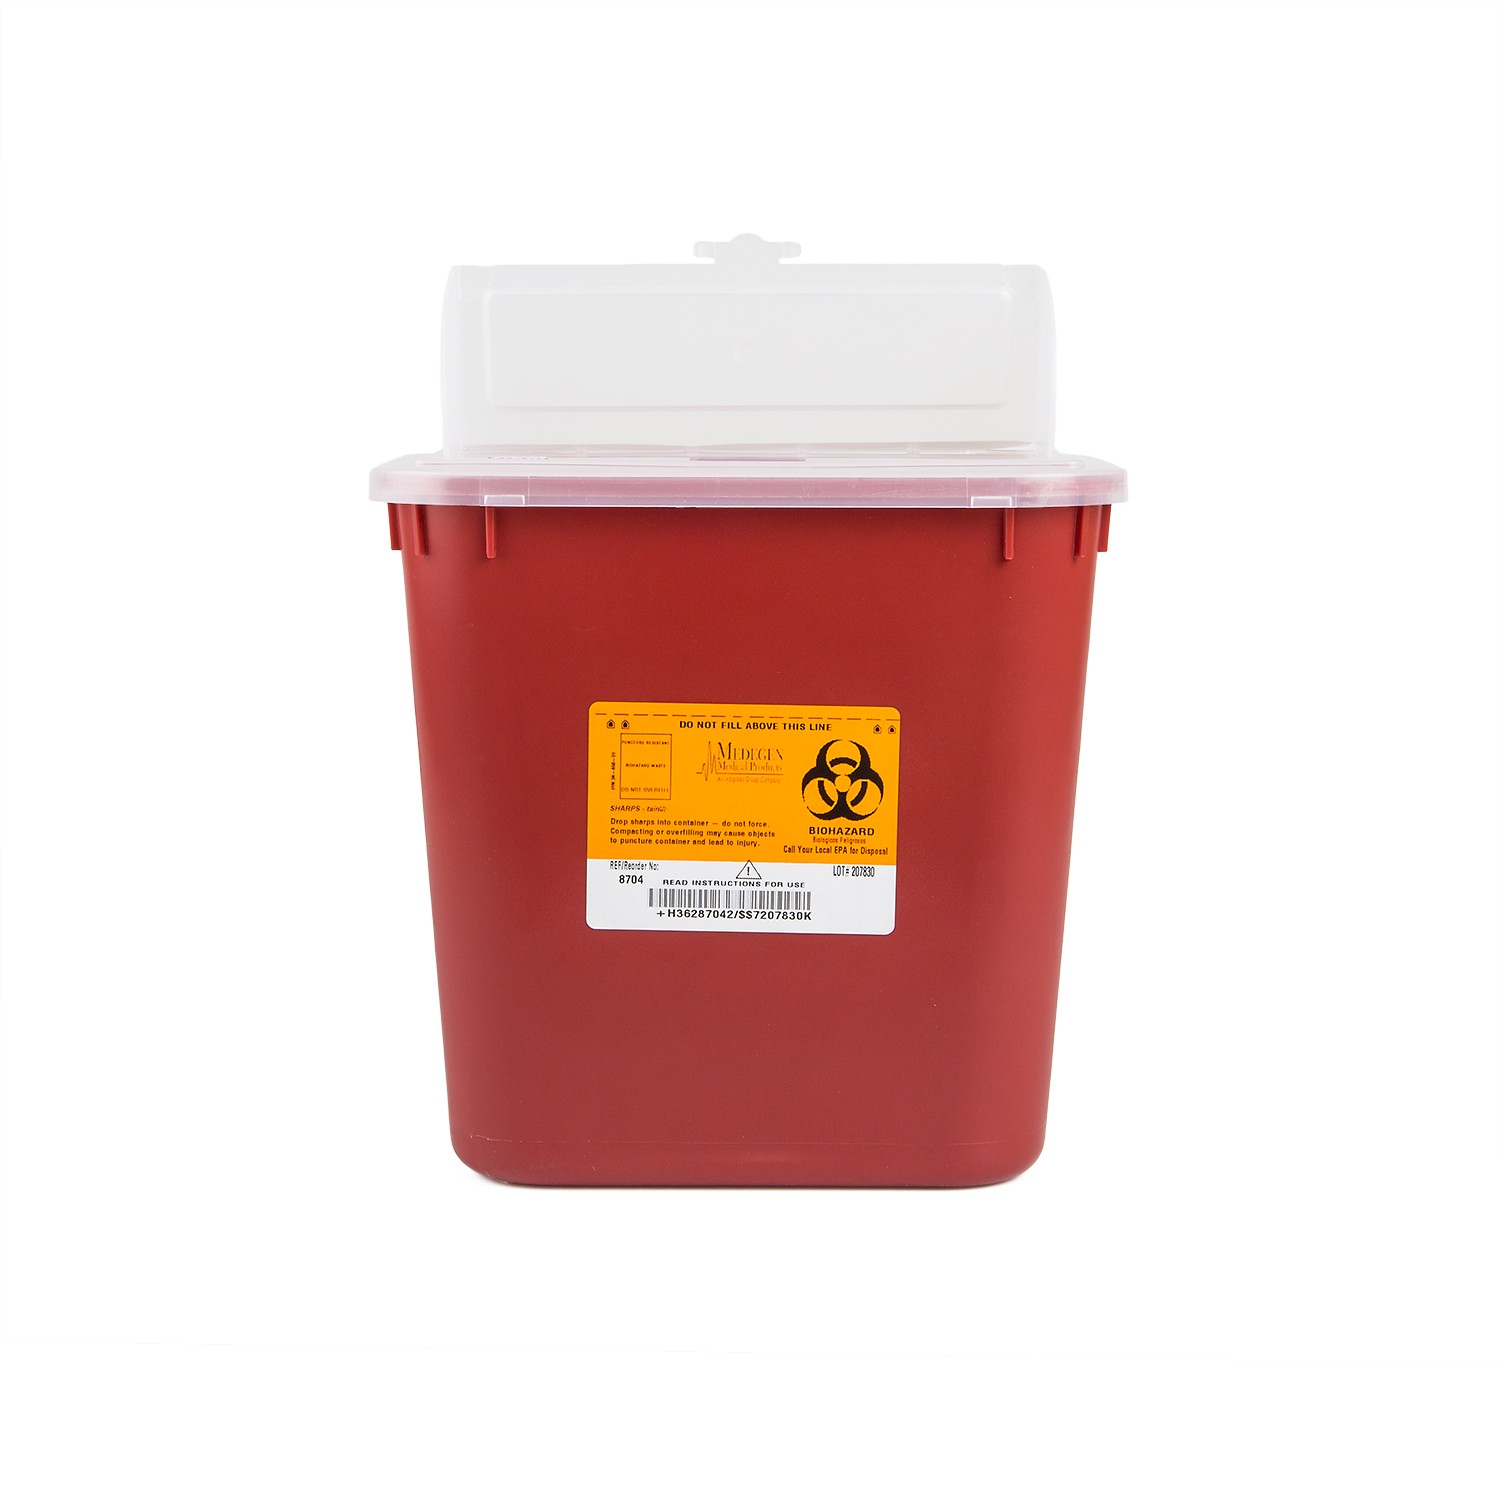 2 Gal Sharps Containers Products, Supplies and Equipment